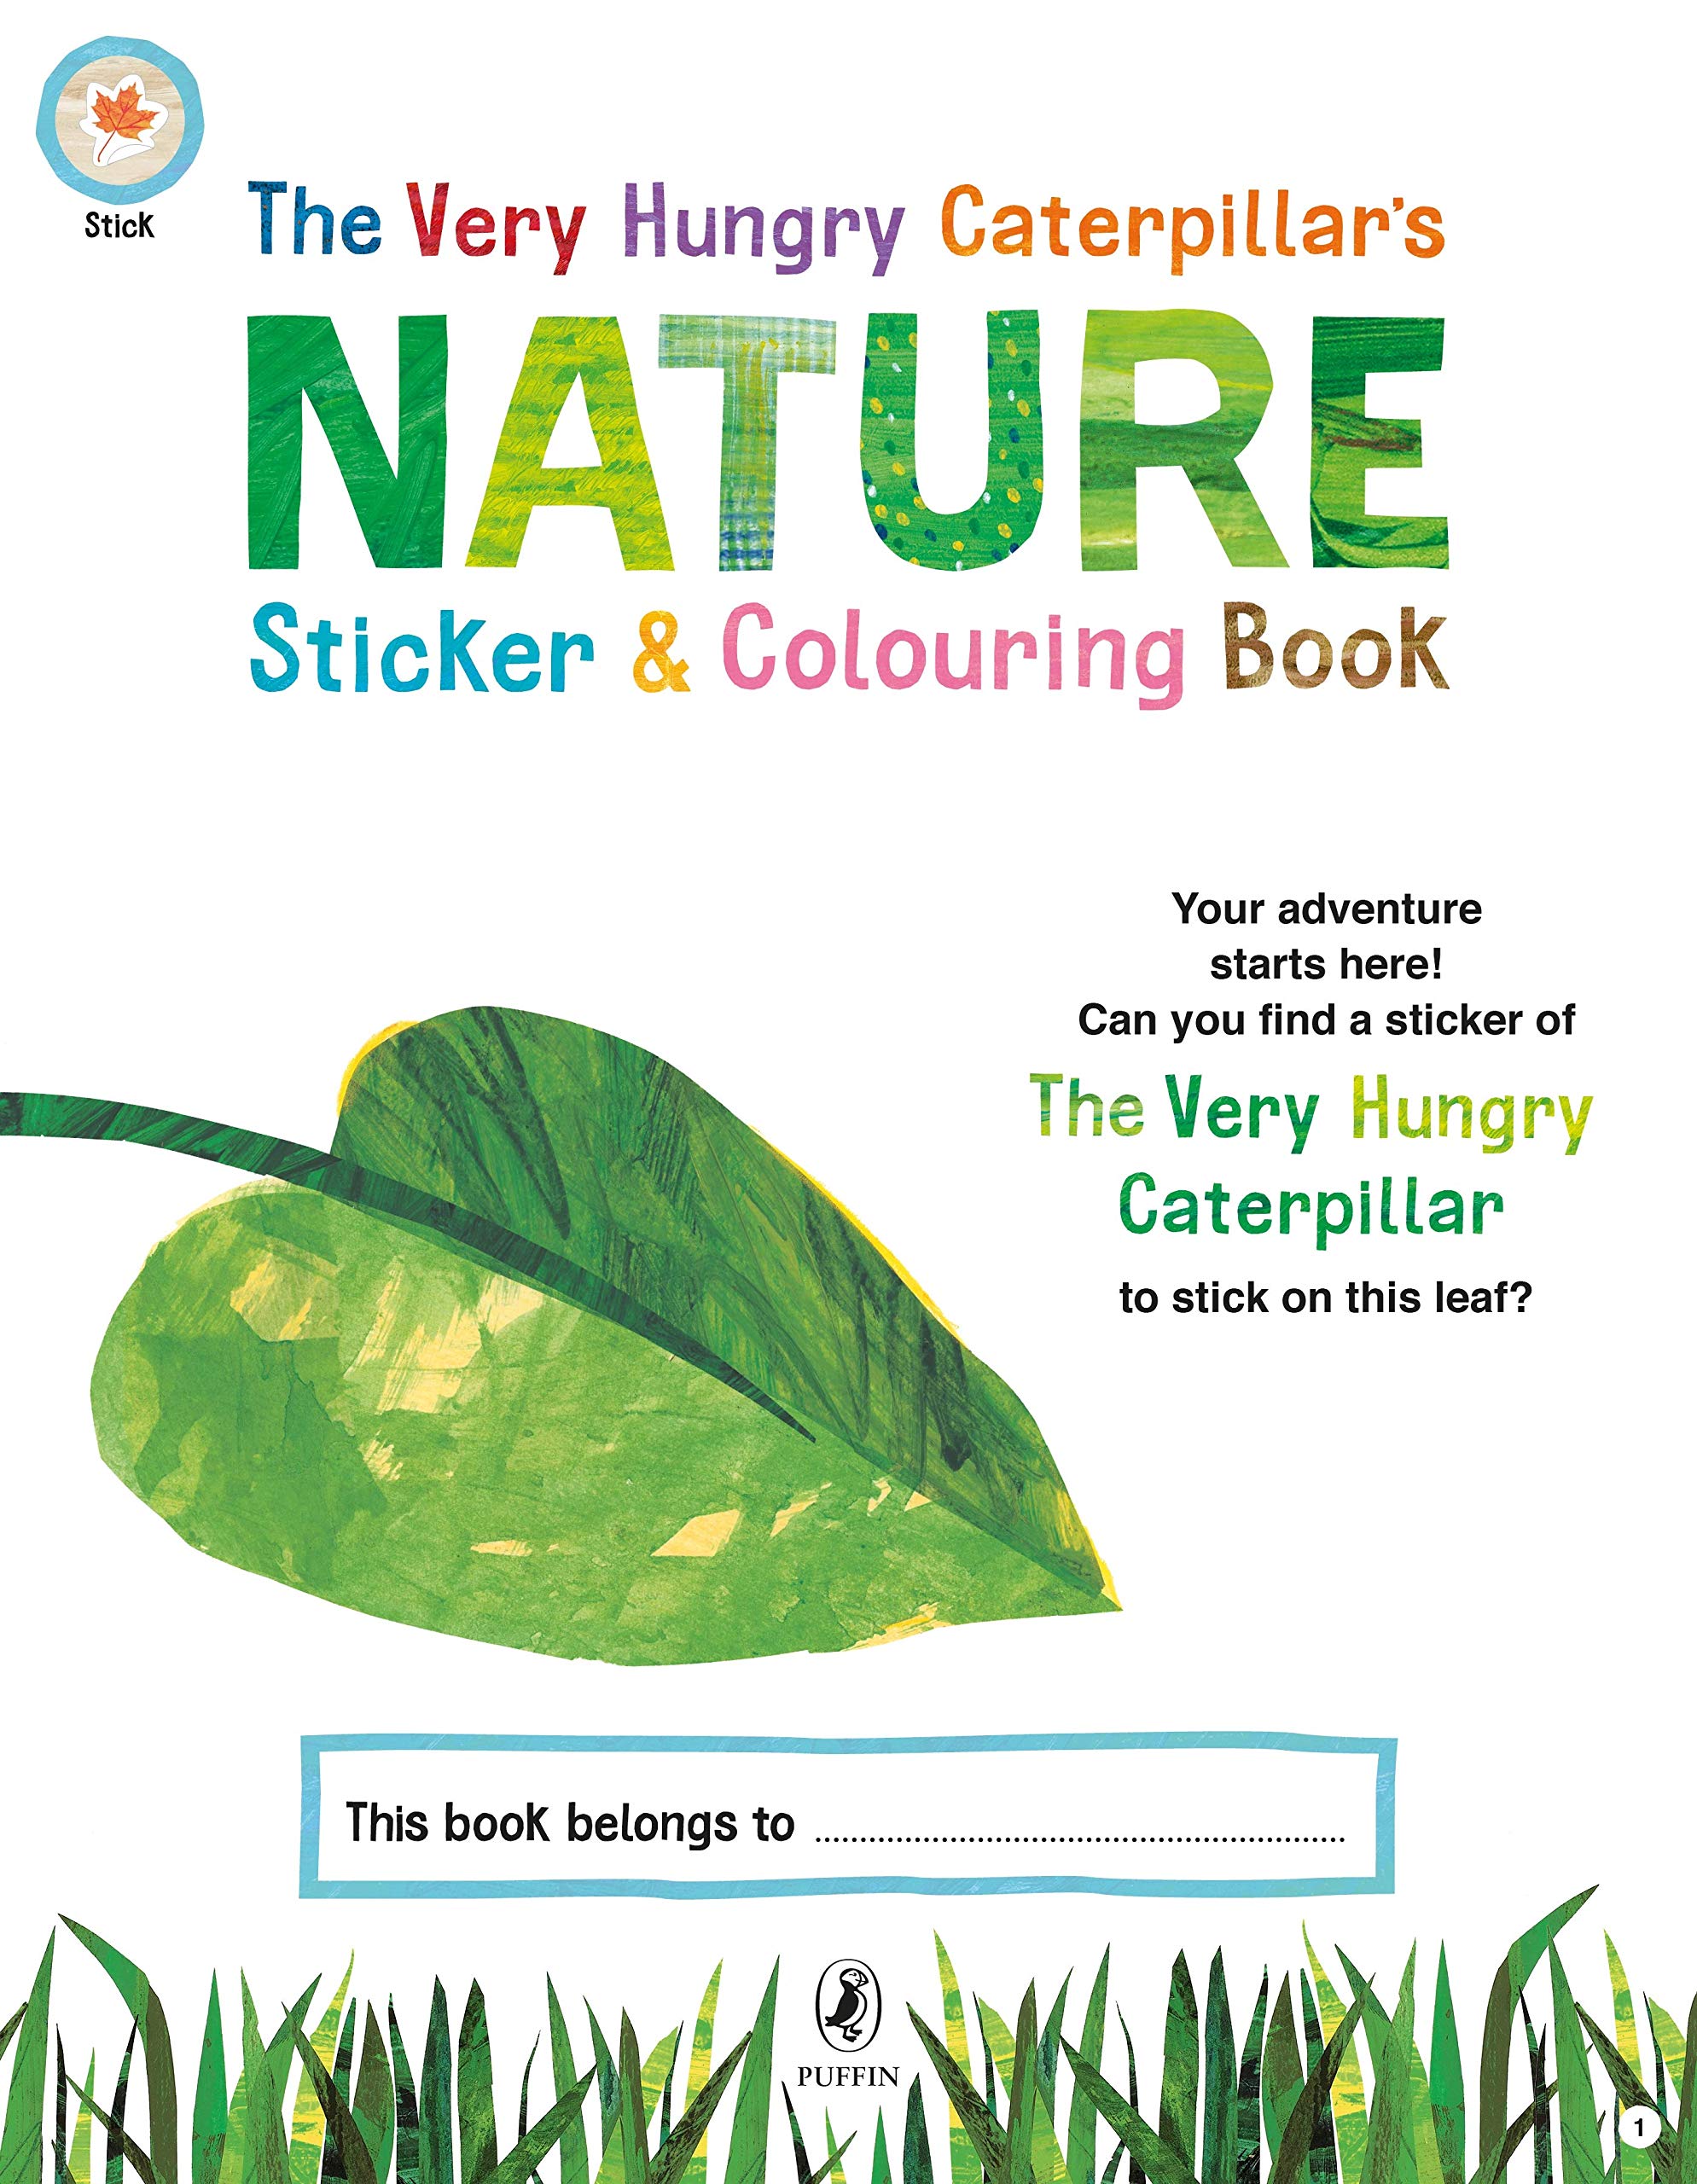 The Very Hungry Caterpillar’s Nature Sticker and Colouring Book